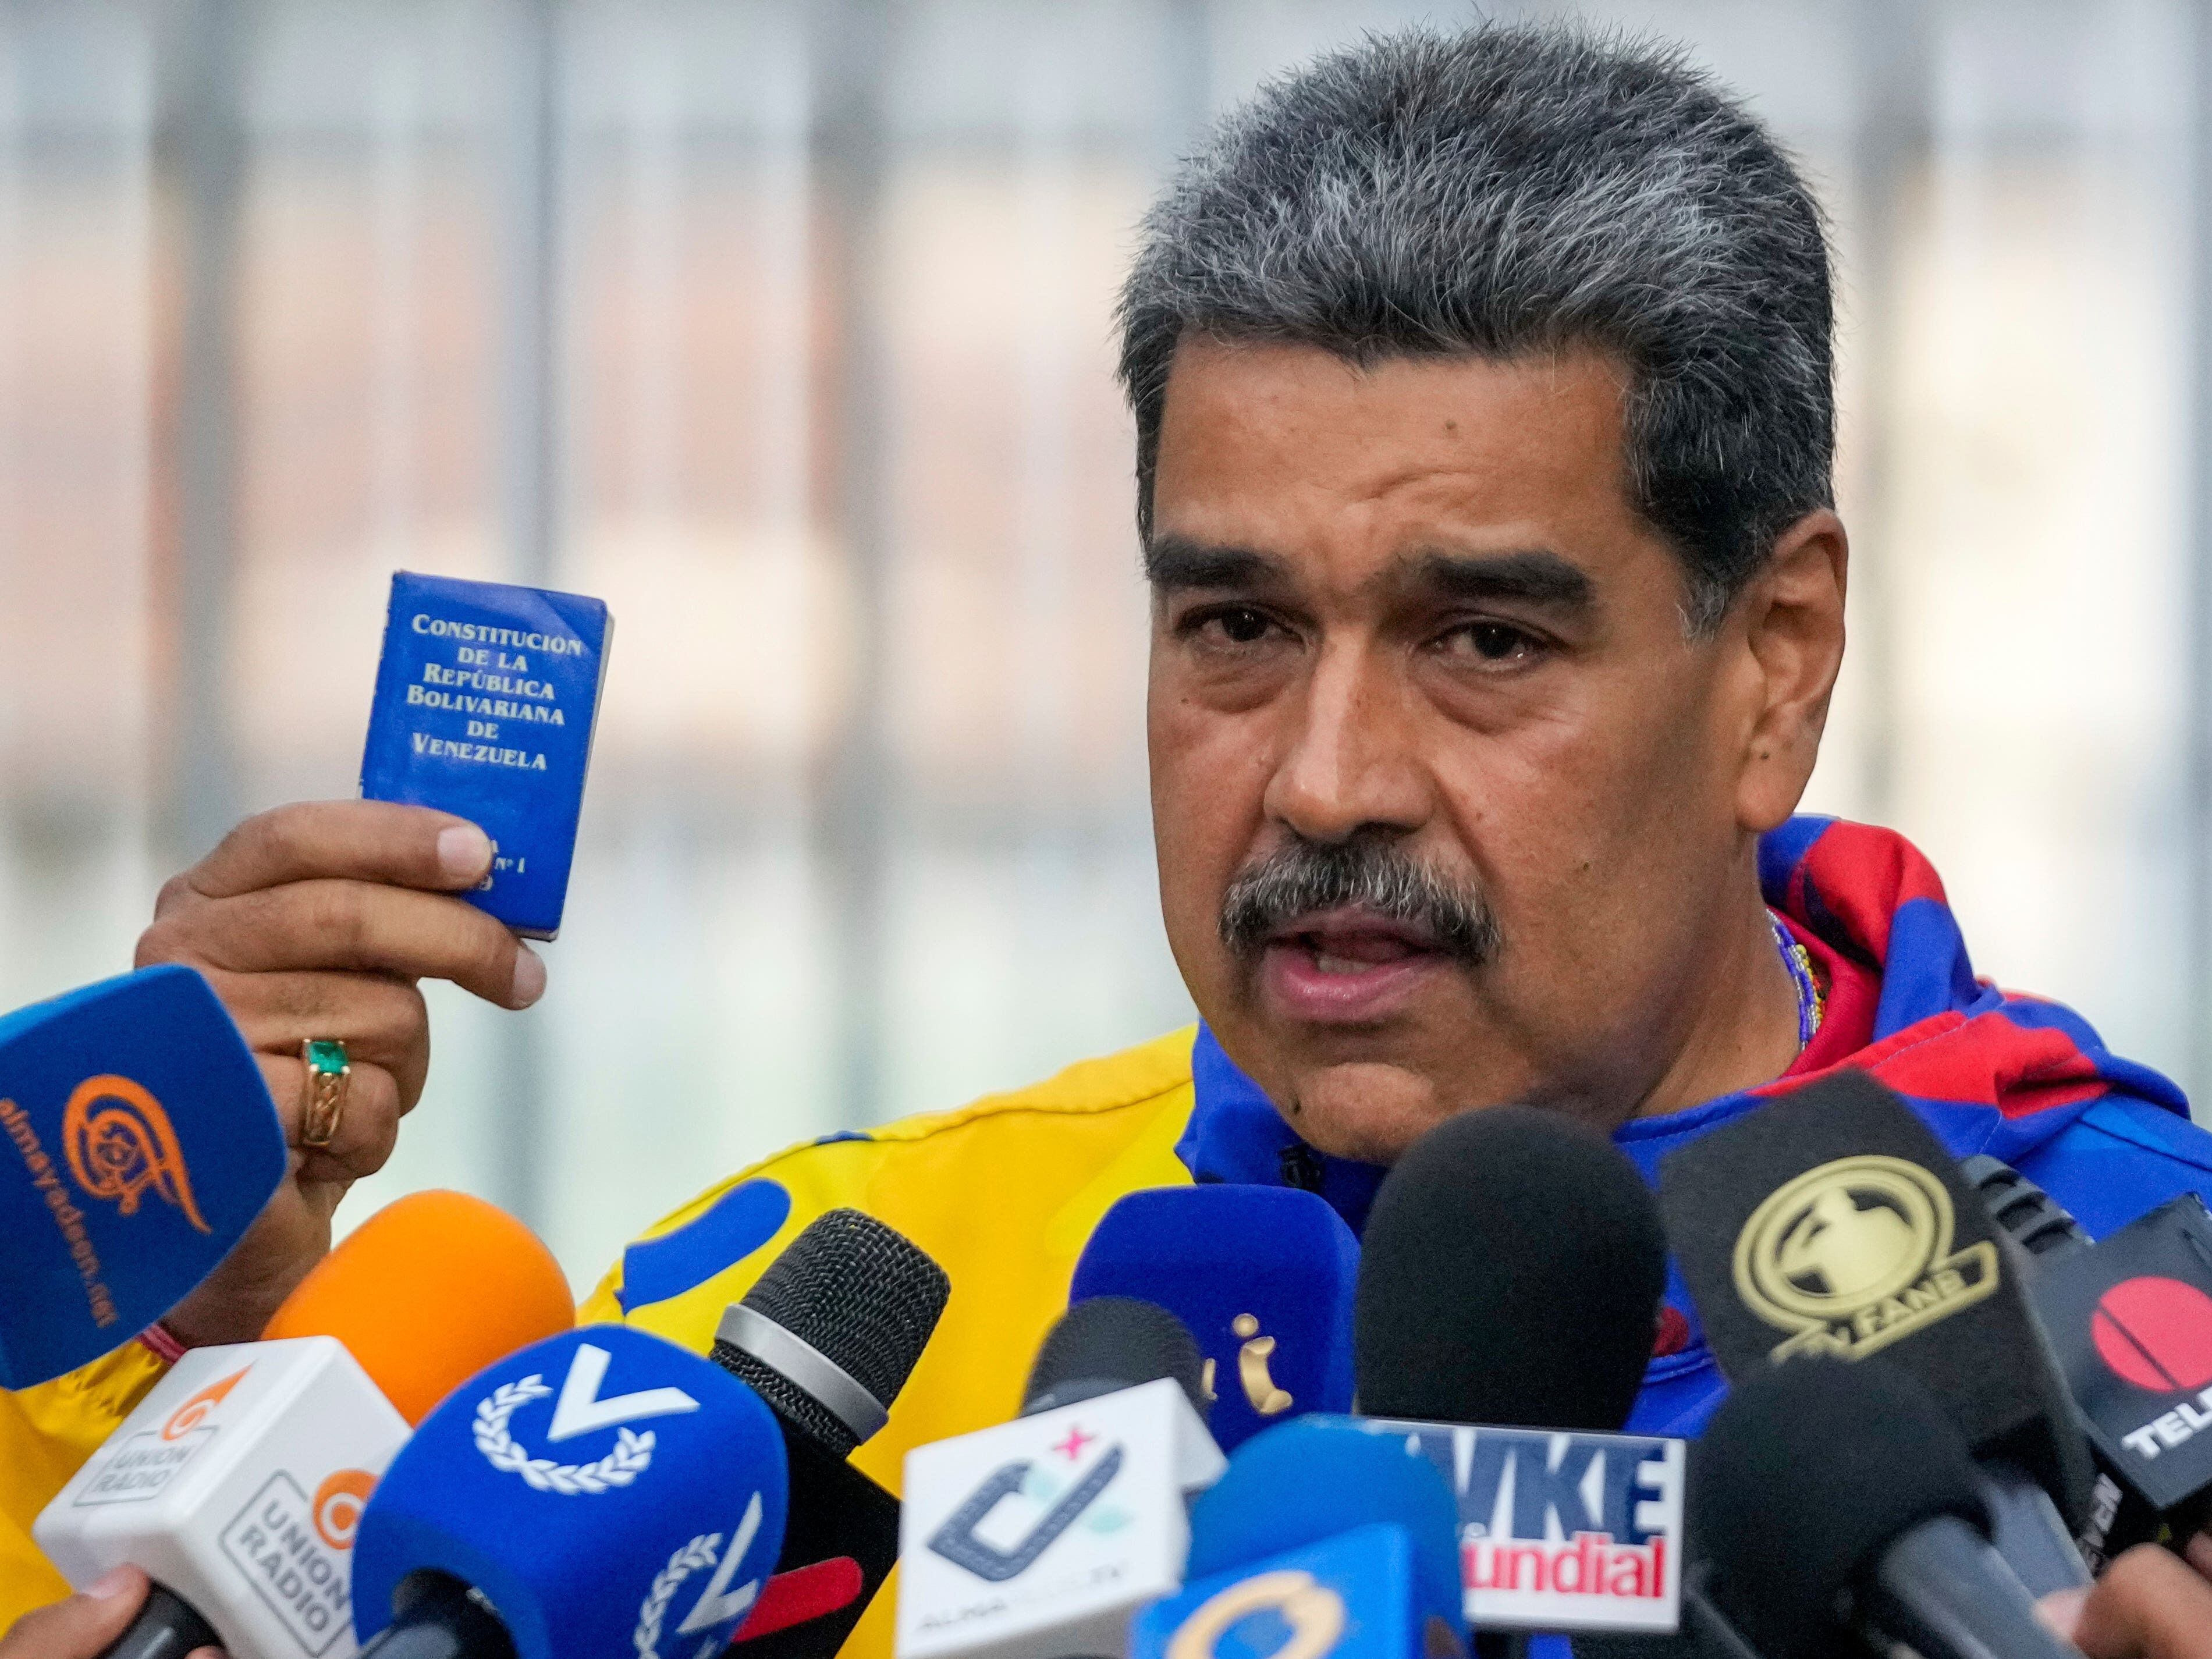 Maduro declared election winner as opposition claims irregularities